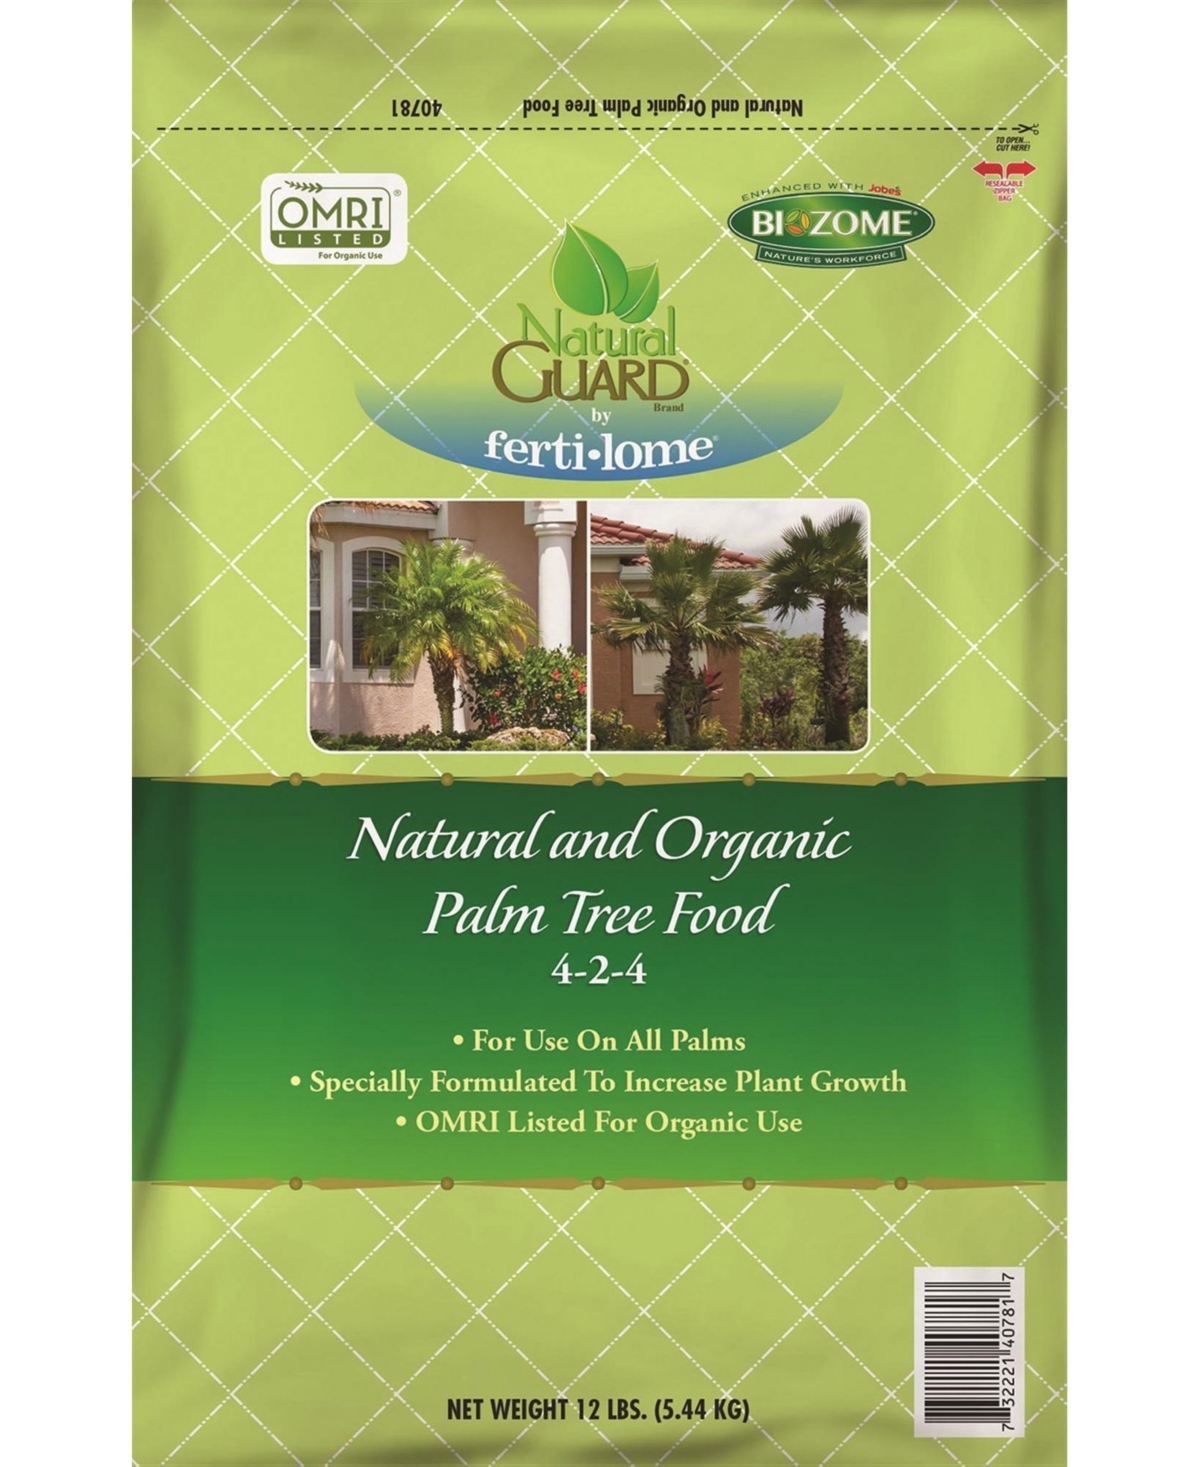 Natural Guard Natural Palm Tree Food 4-2-4, 12lbs - Open Miscellaneous